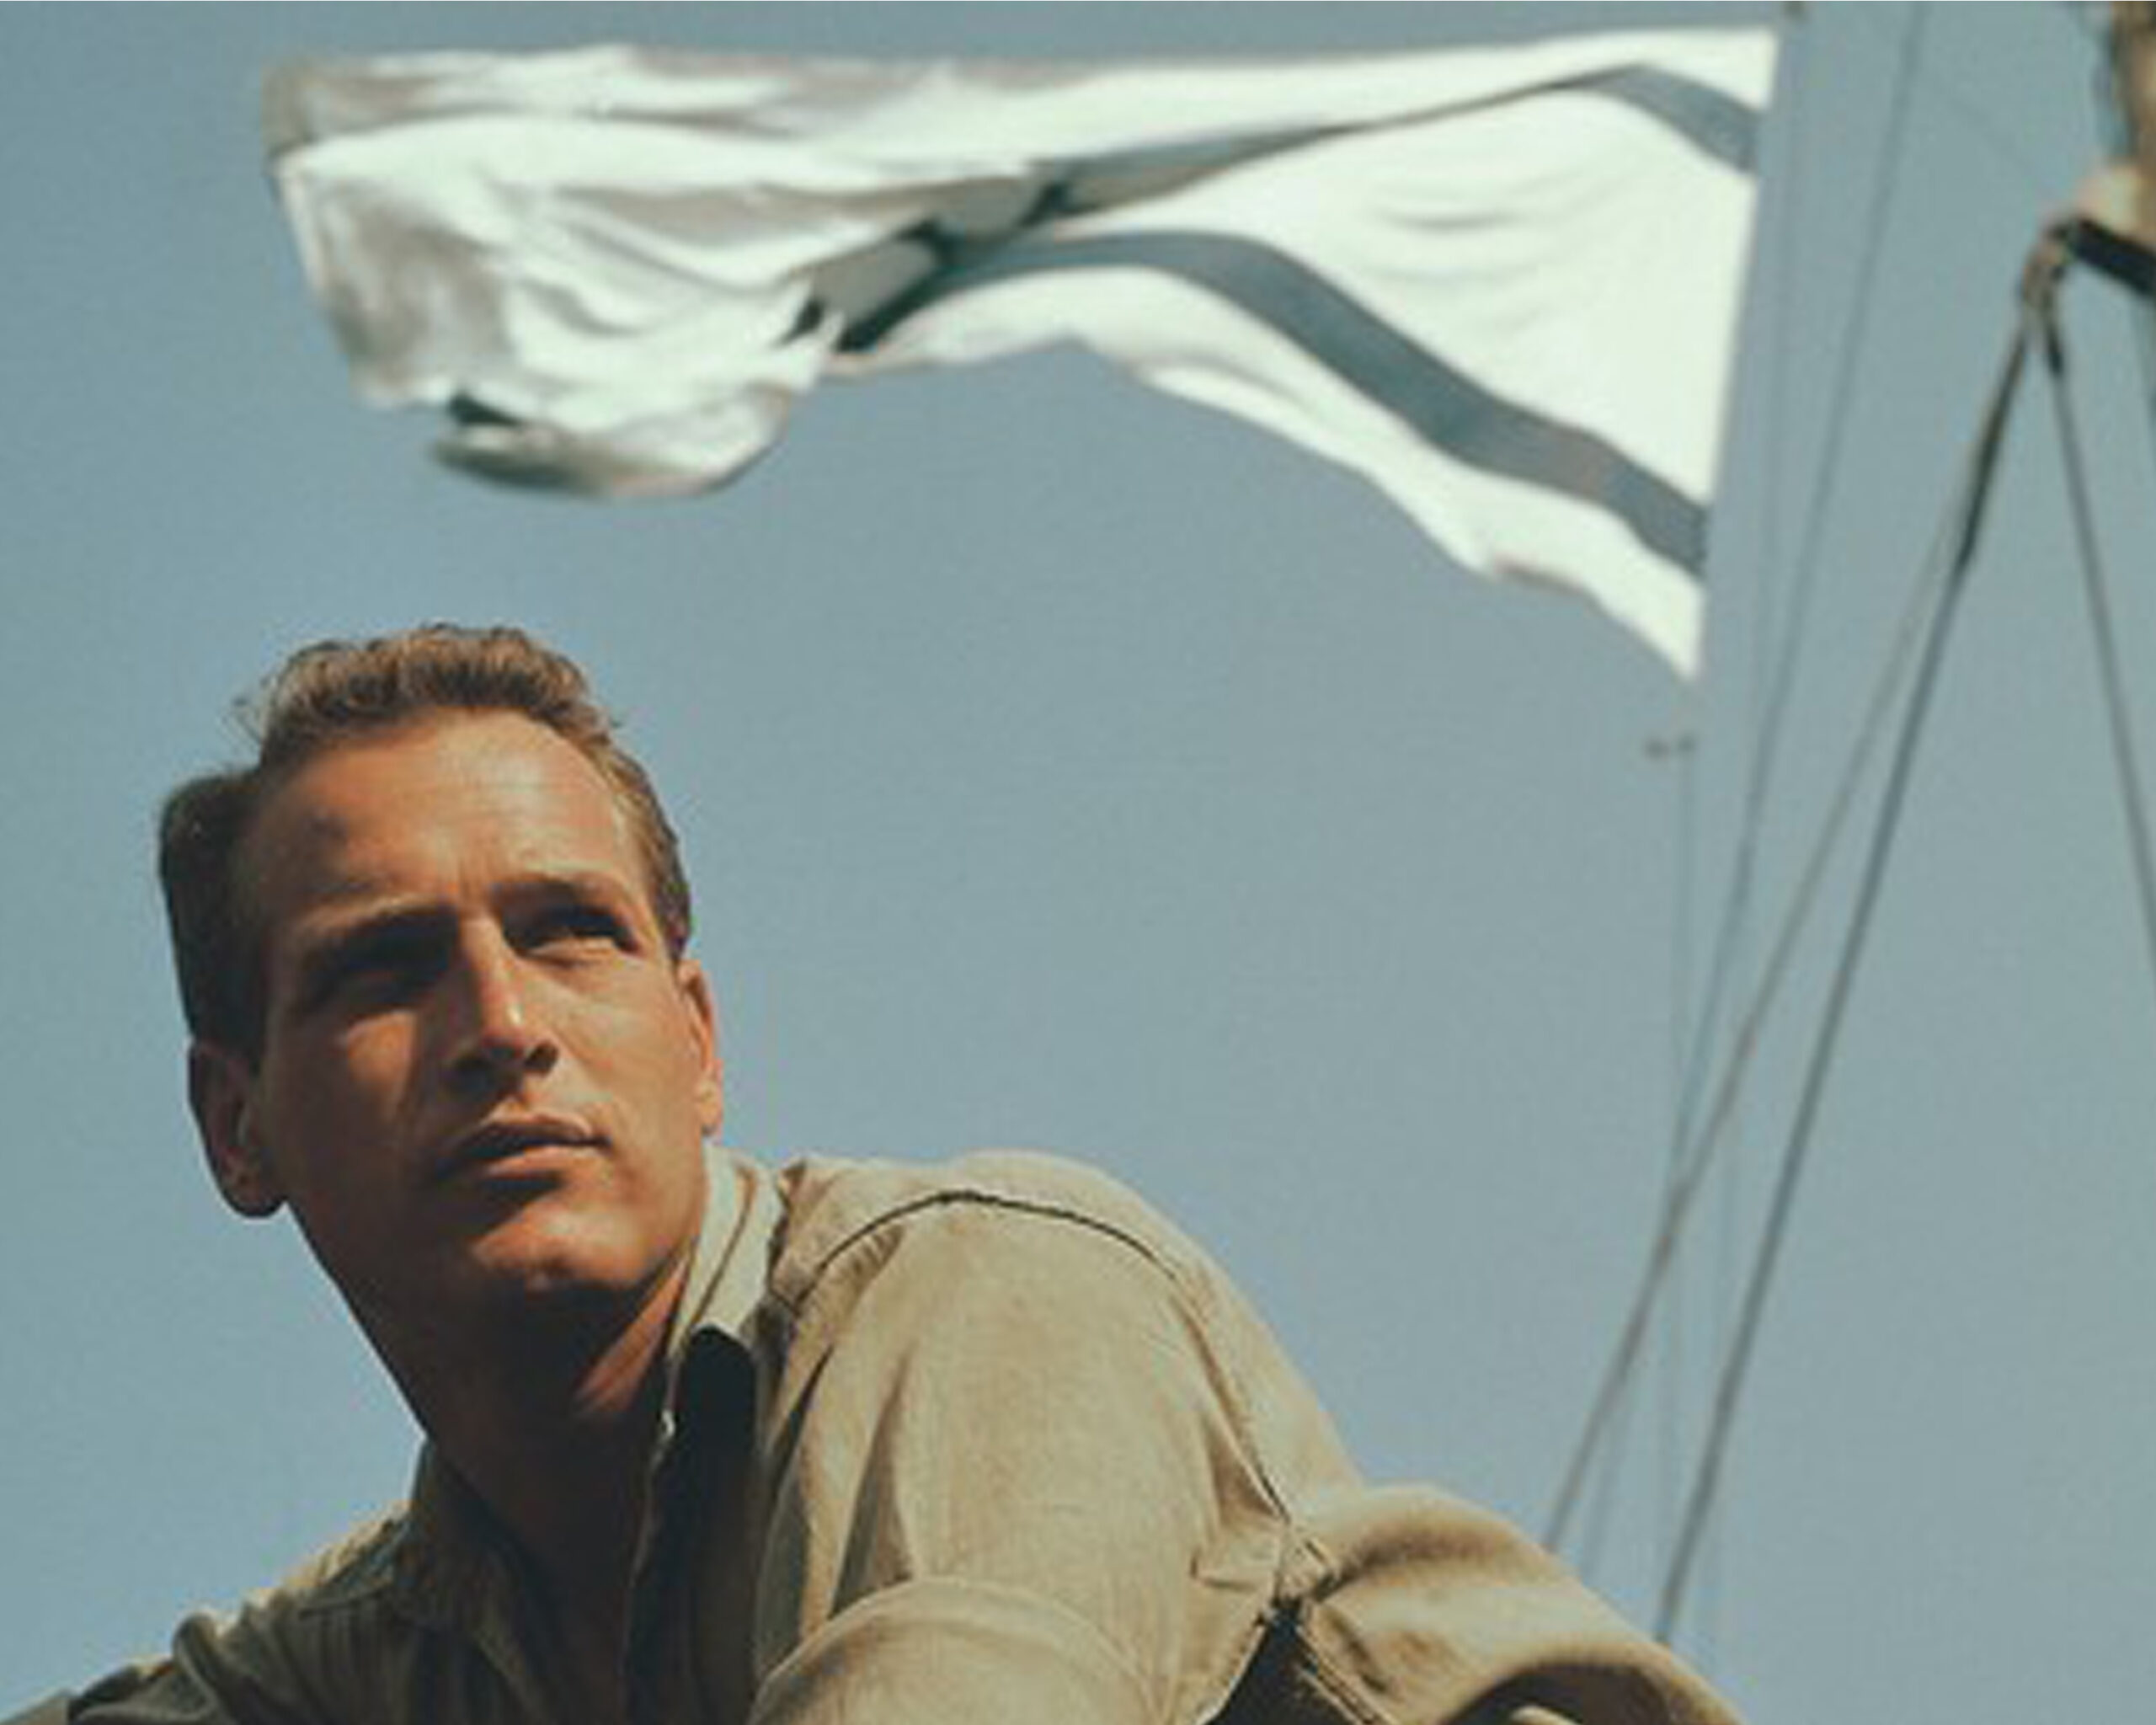 https://www.afjrv.org/wp-content/uploads/2021/01/Paul-Newman-in-Israel-scaled.jpg